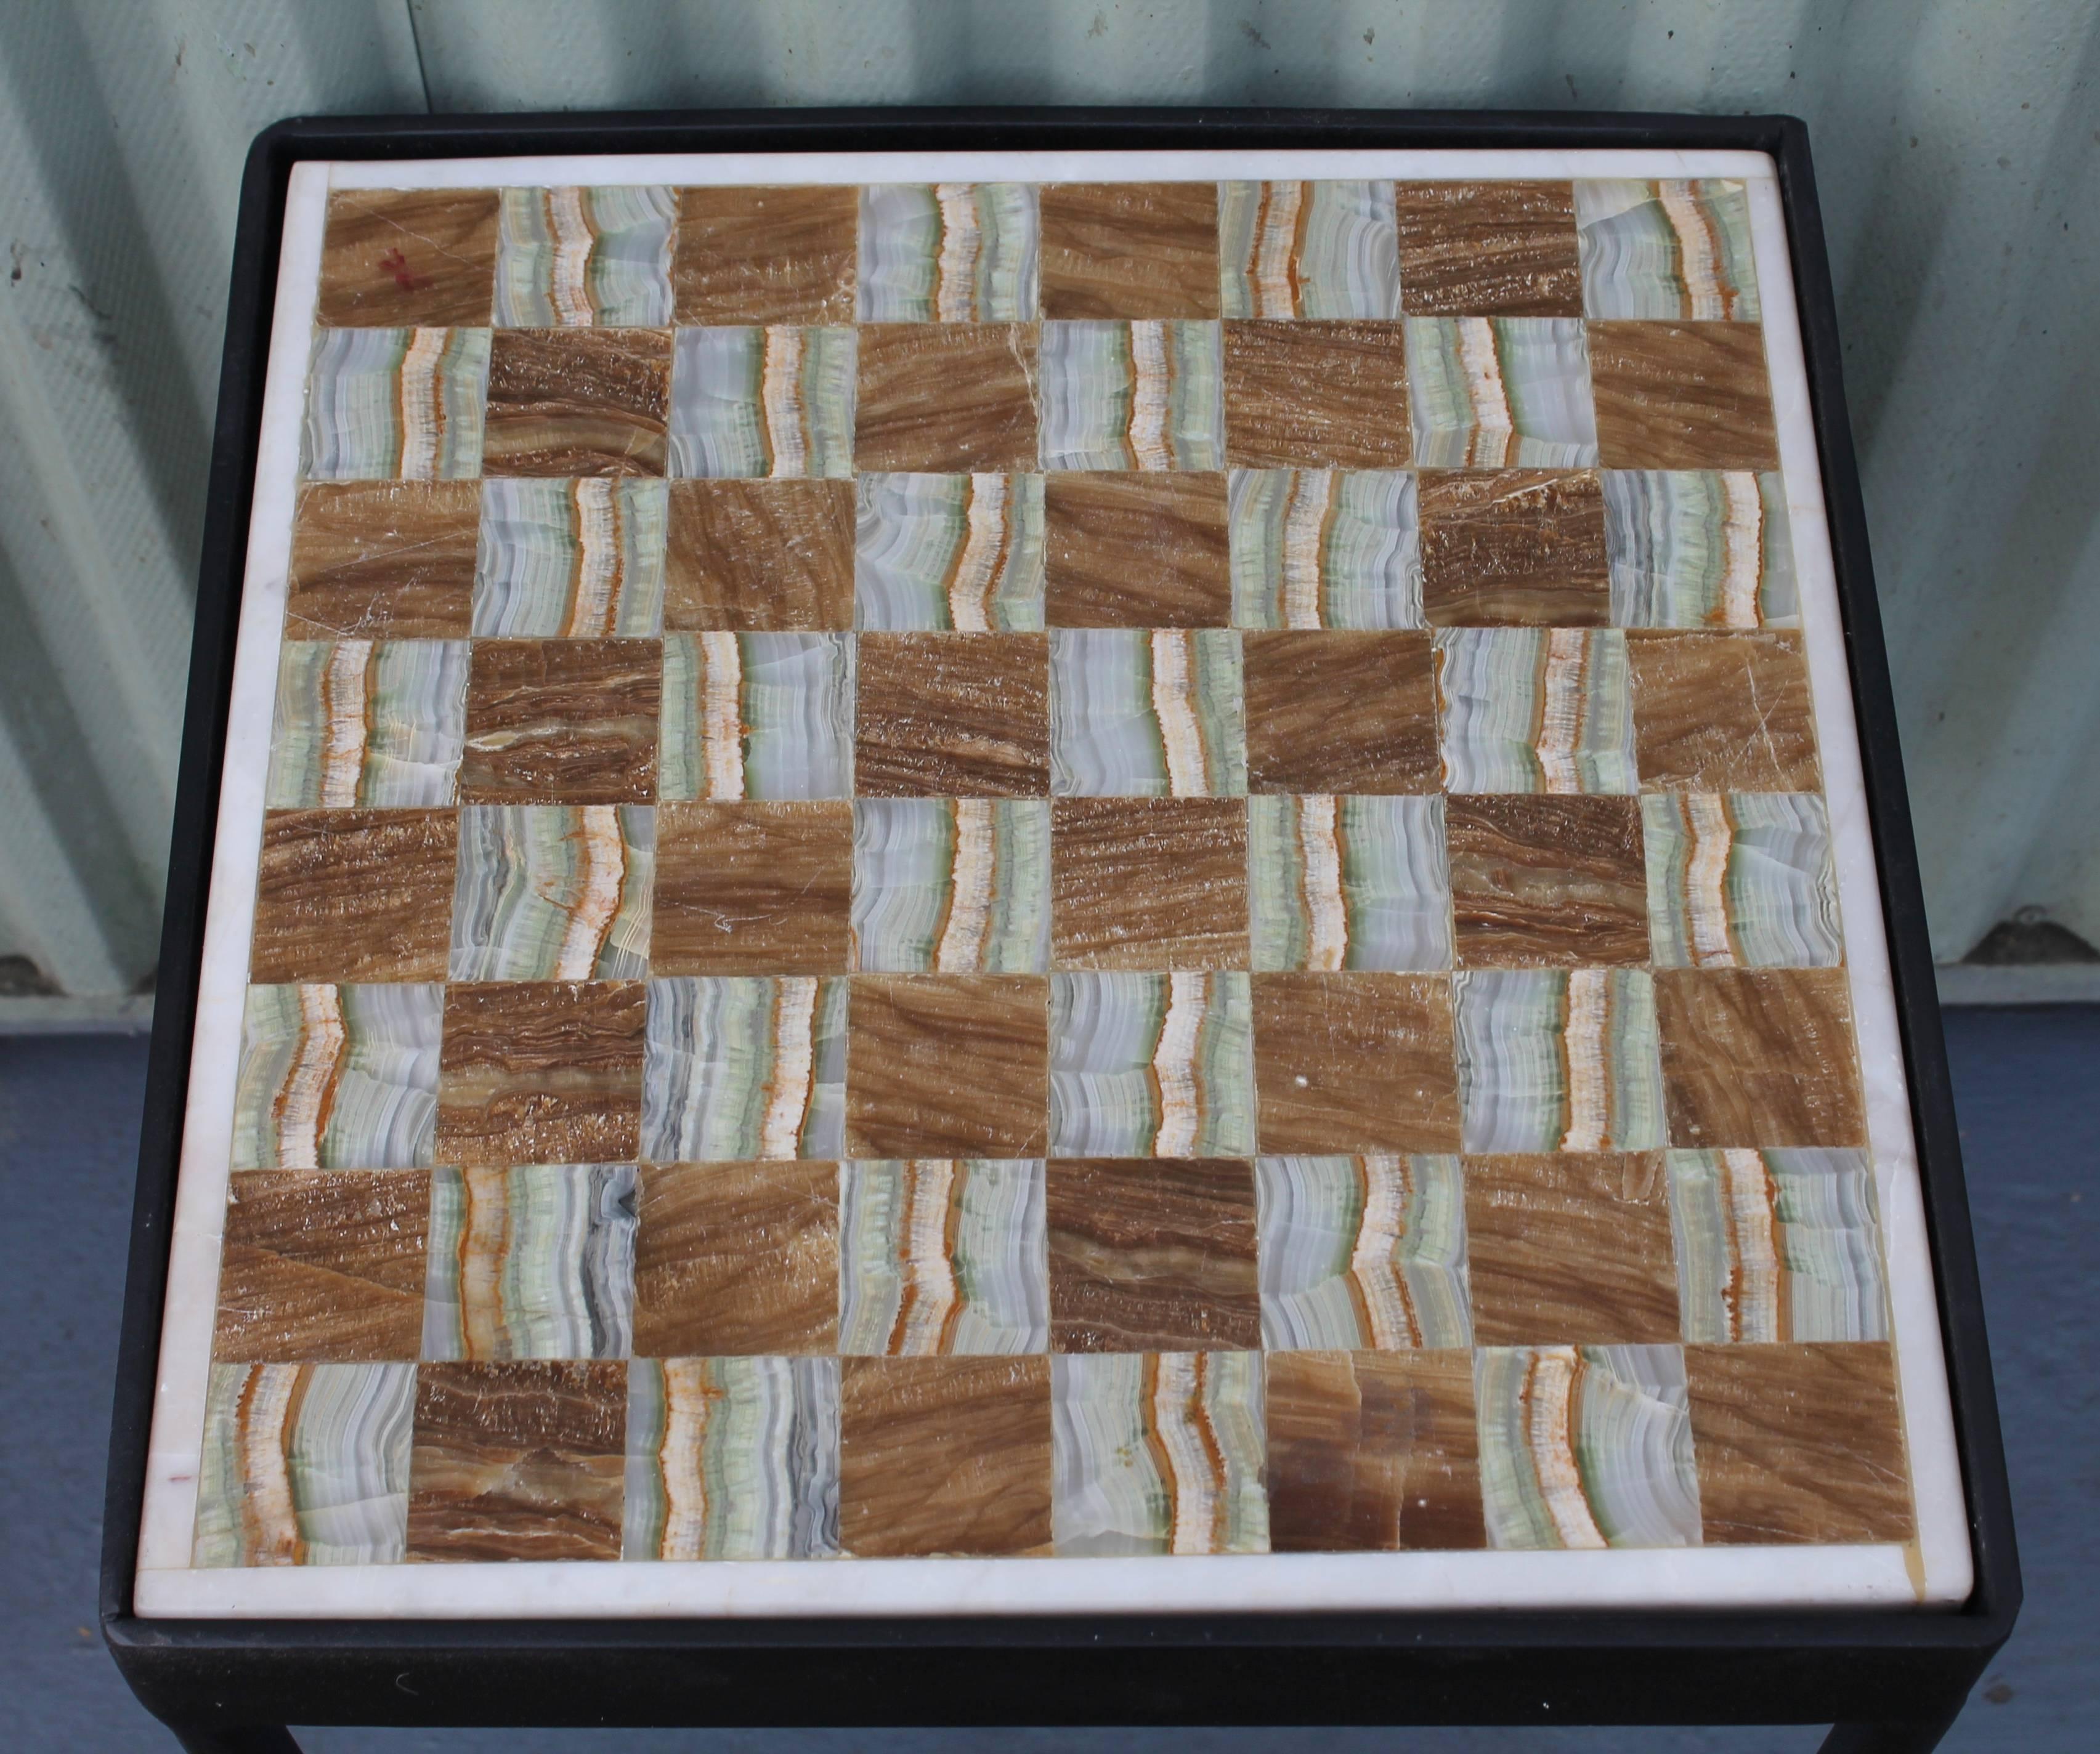 Custom-made table. Reversible game board, the colors are neutral. Beautiful centerpiece. Goes with any decor.